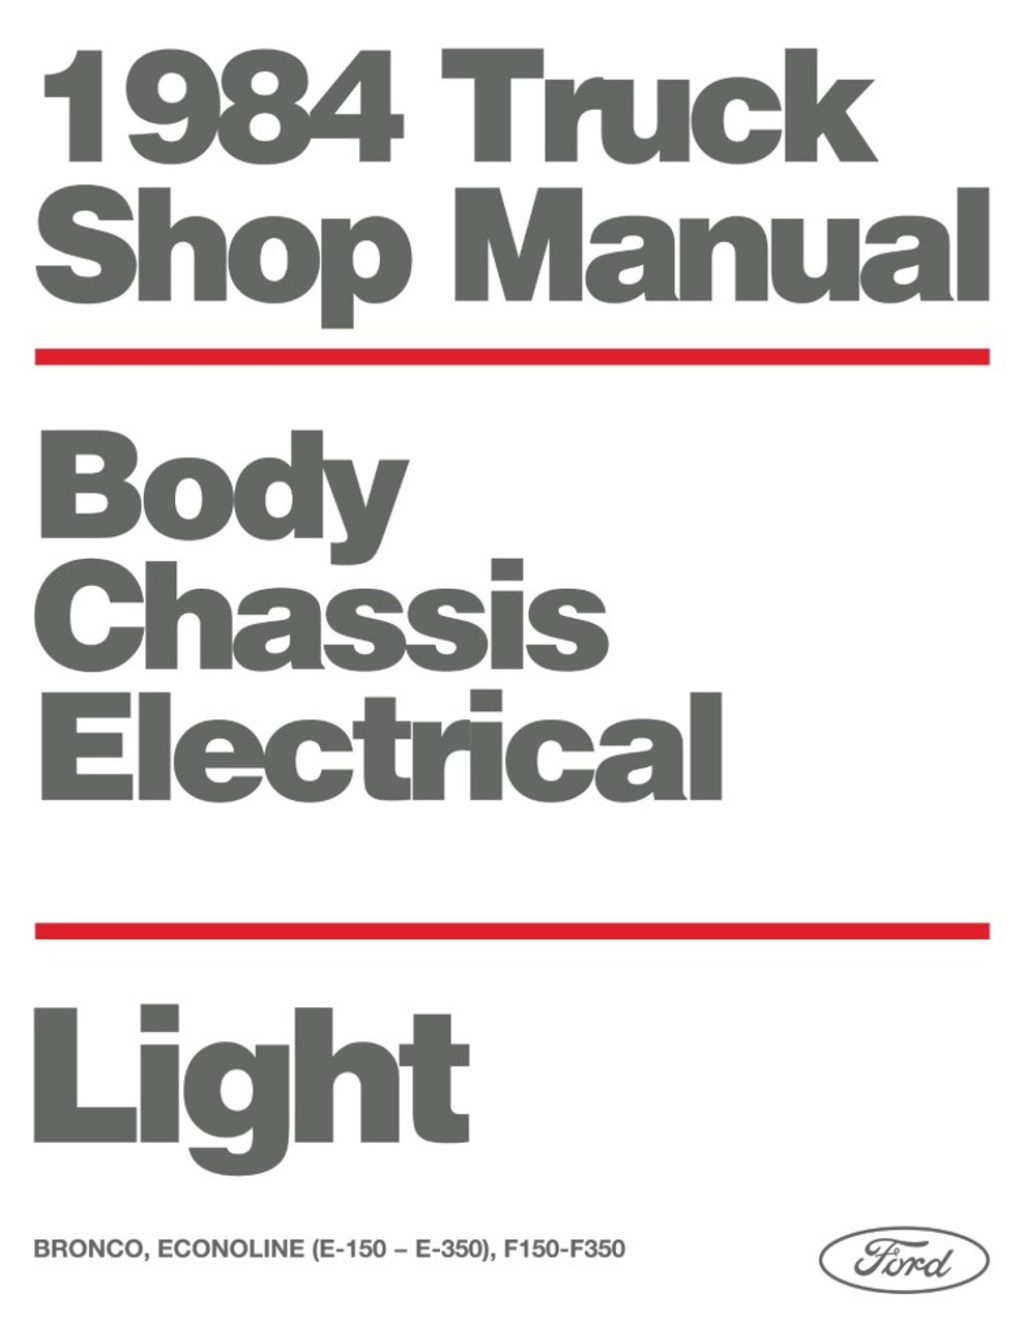 Picture of: Ford Truck Shop Manual – Body, Chassis, Engine & Electrical